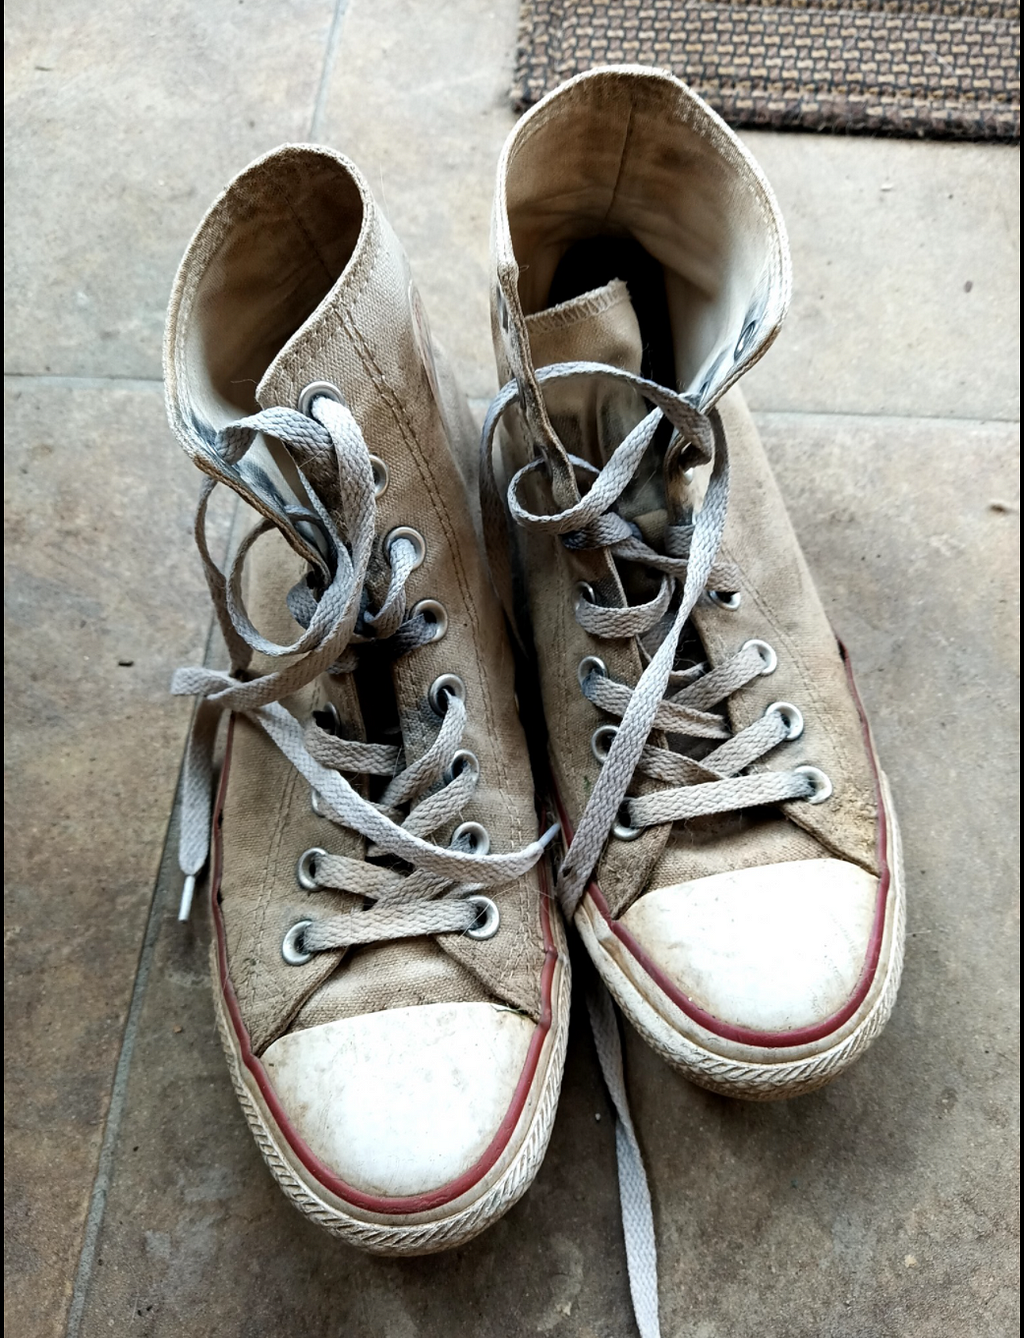 A pair of sneakers, Converse high tops, dirty and worn, rest on a tile floor.